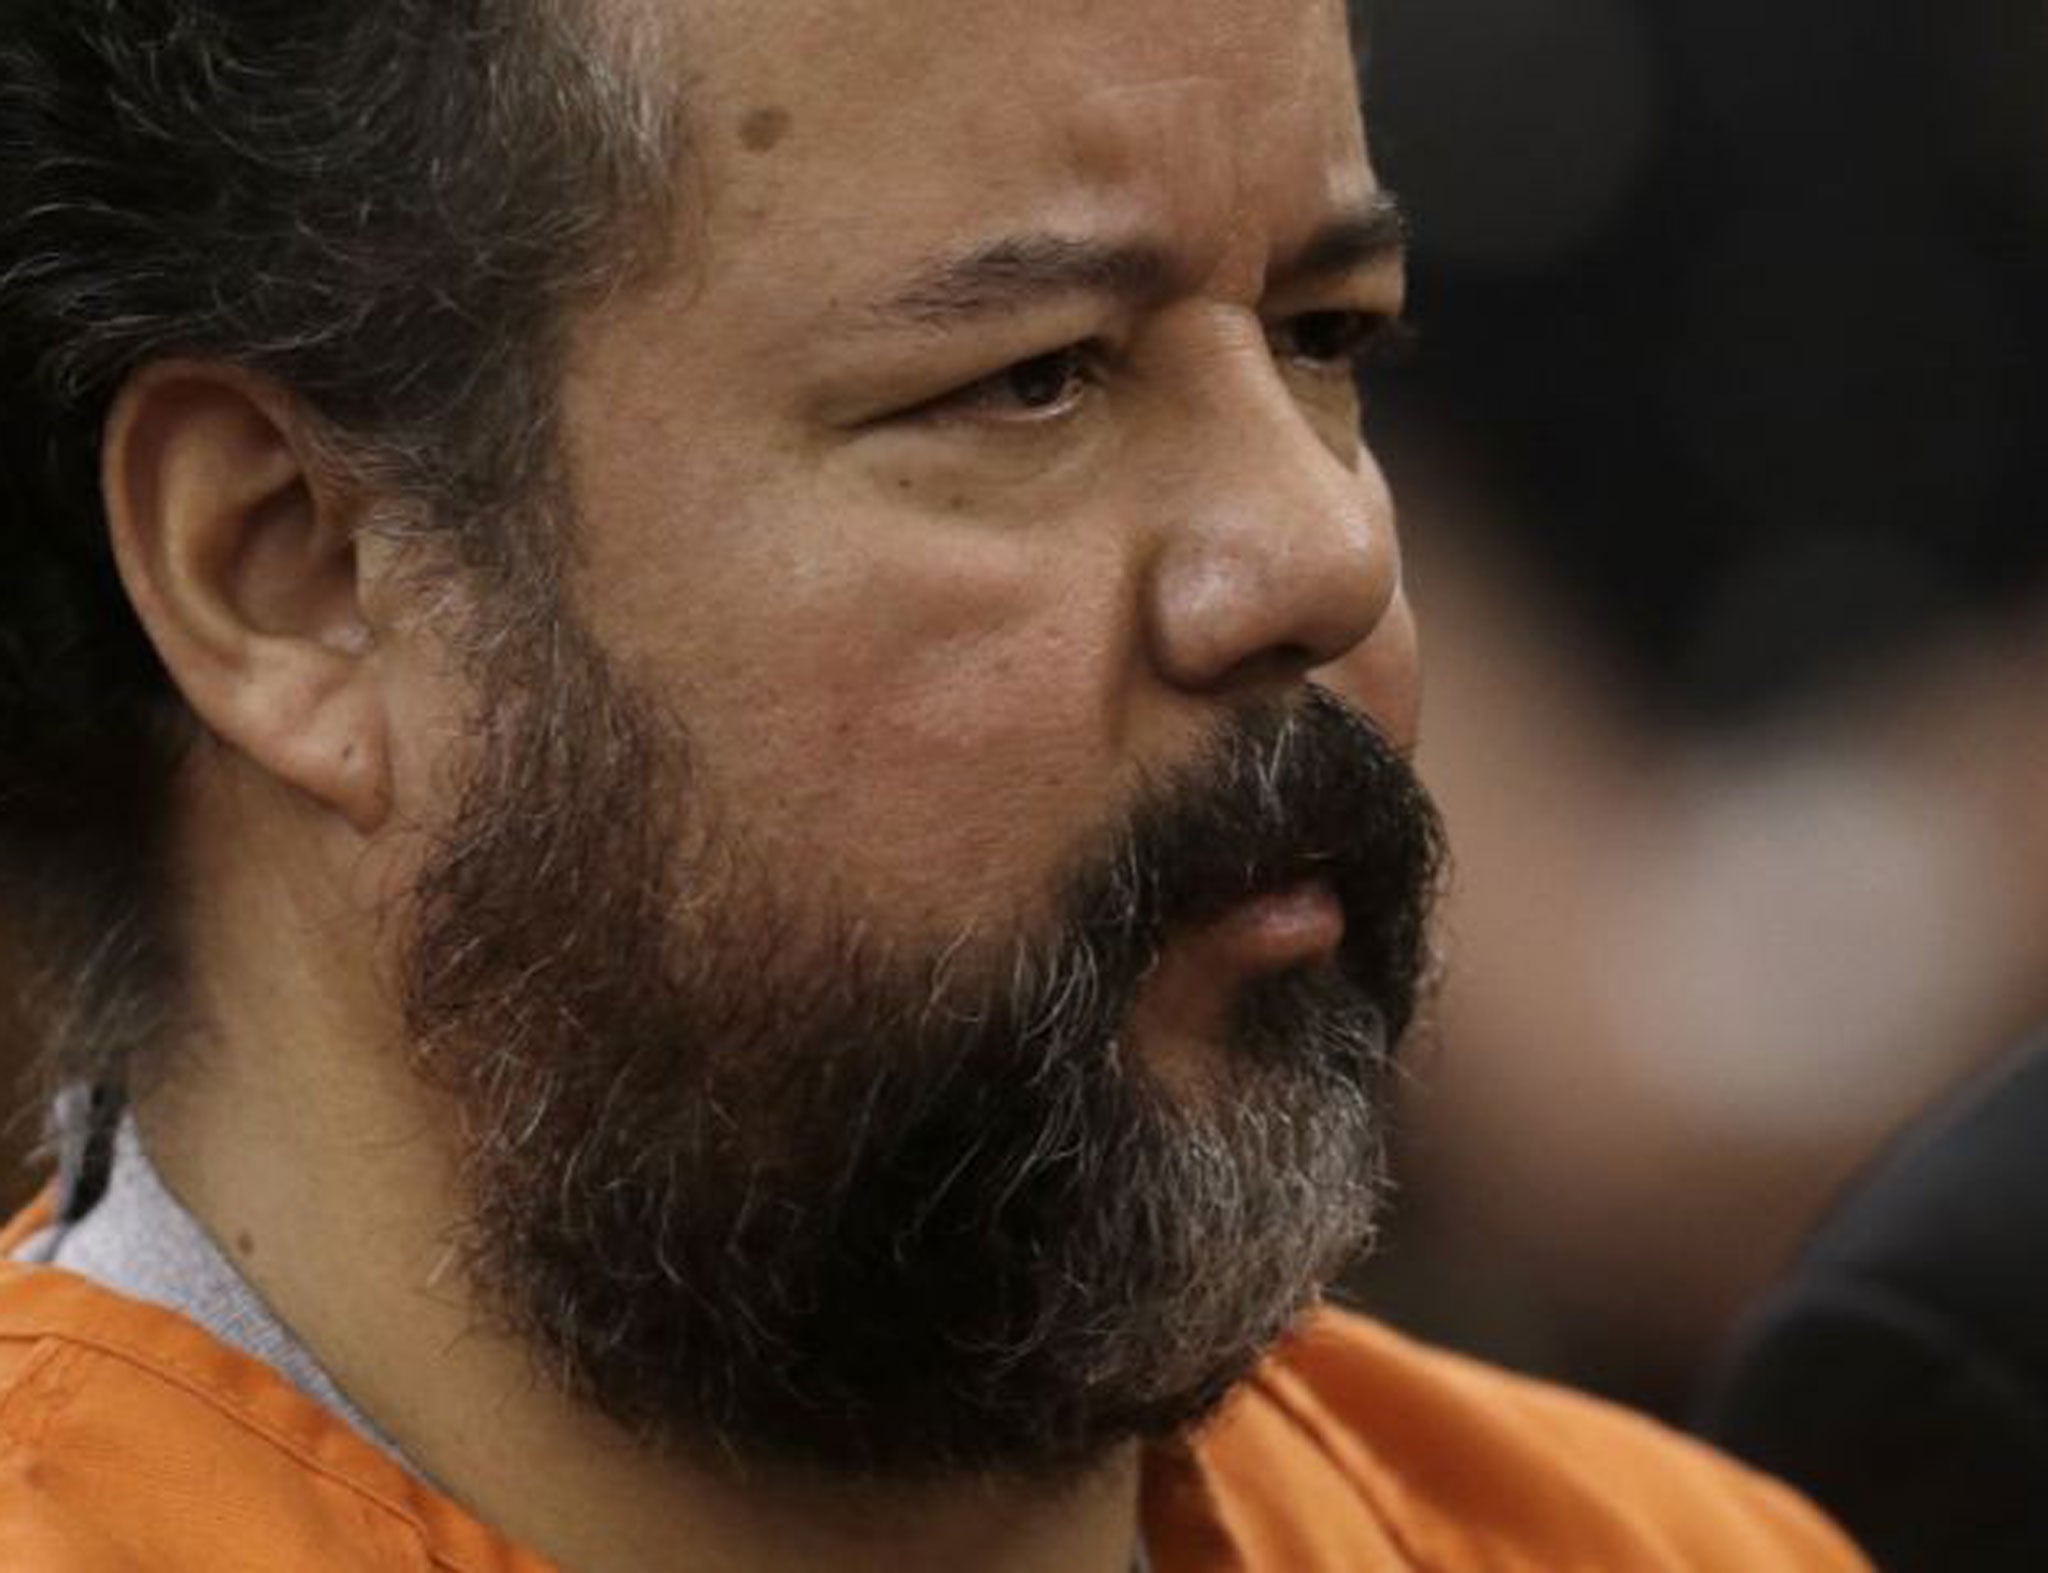 Ariel Castro faces 977 counts, including kidnapping and rape